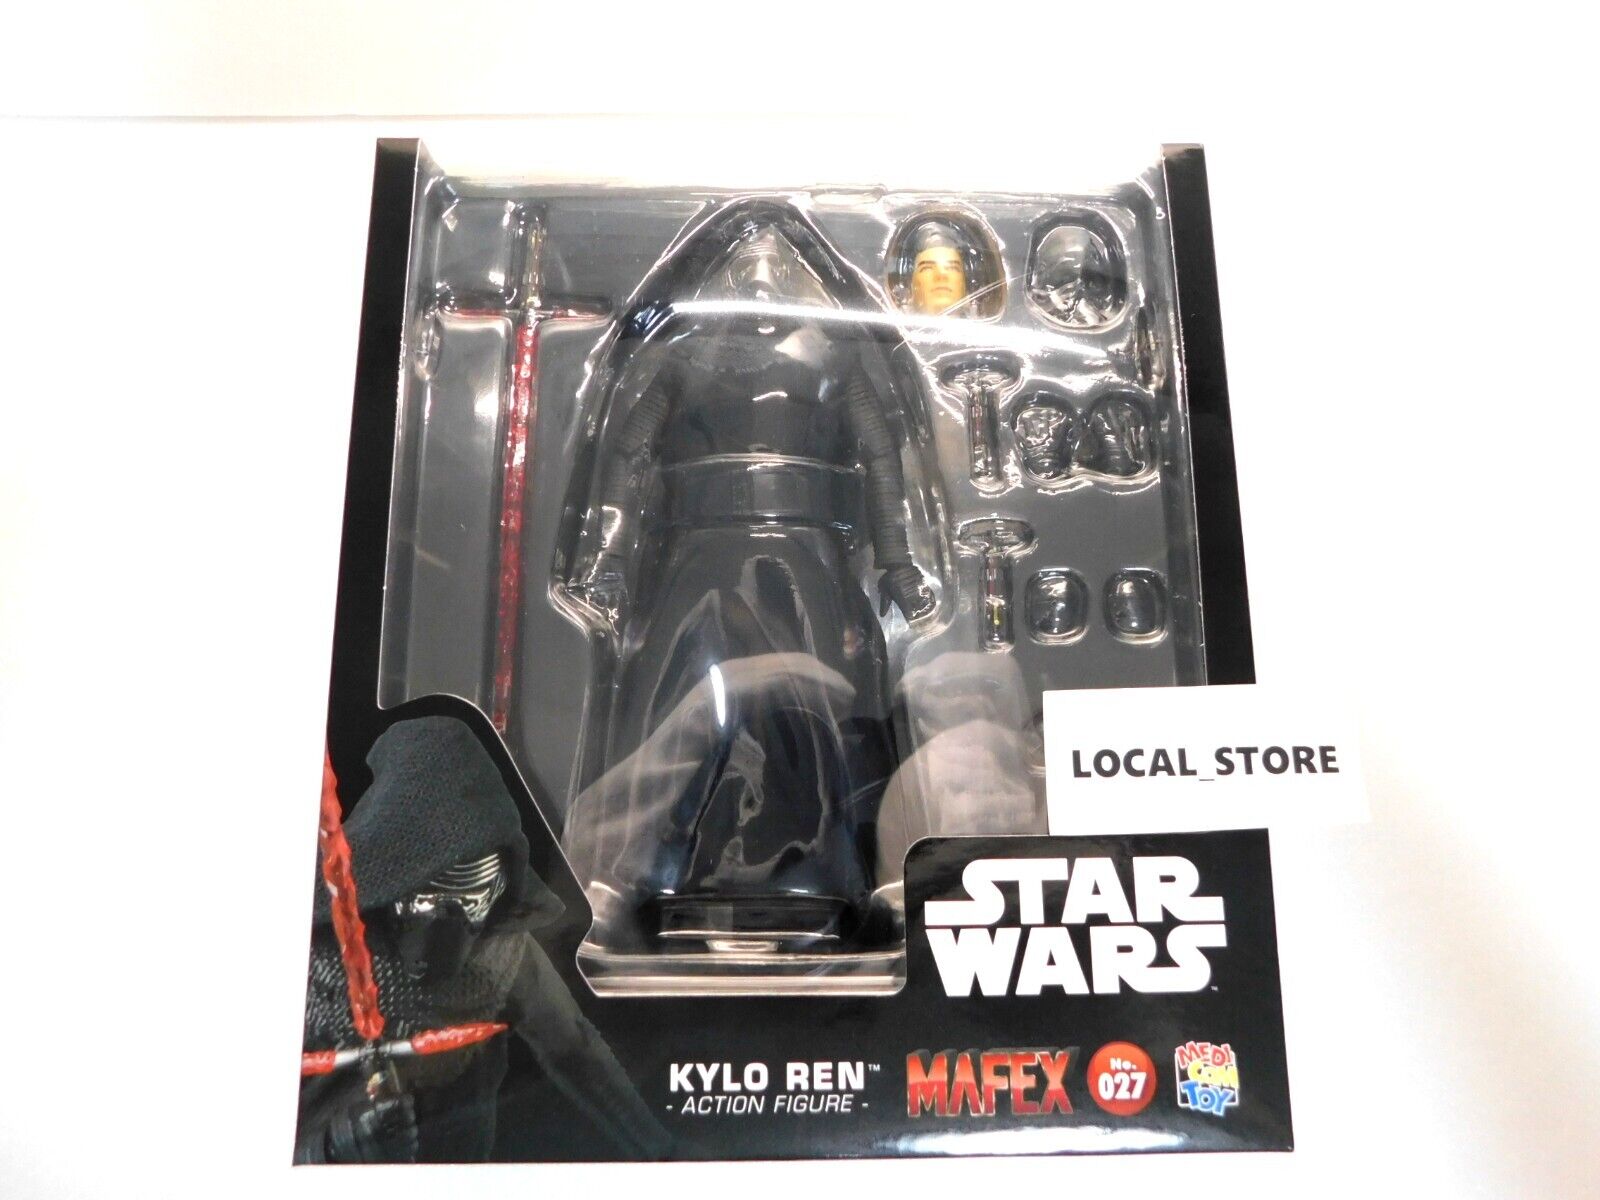 Medicom Toy MAFEX Star Wars The Force Awakens No.027 Handling 2day Expd Shipping